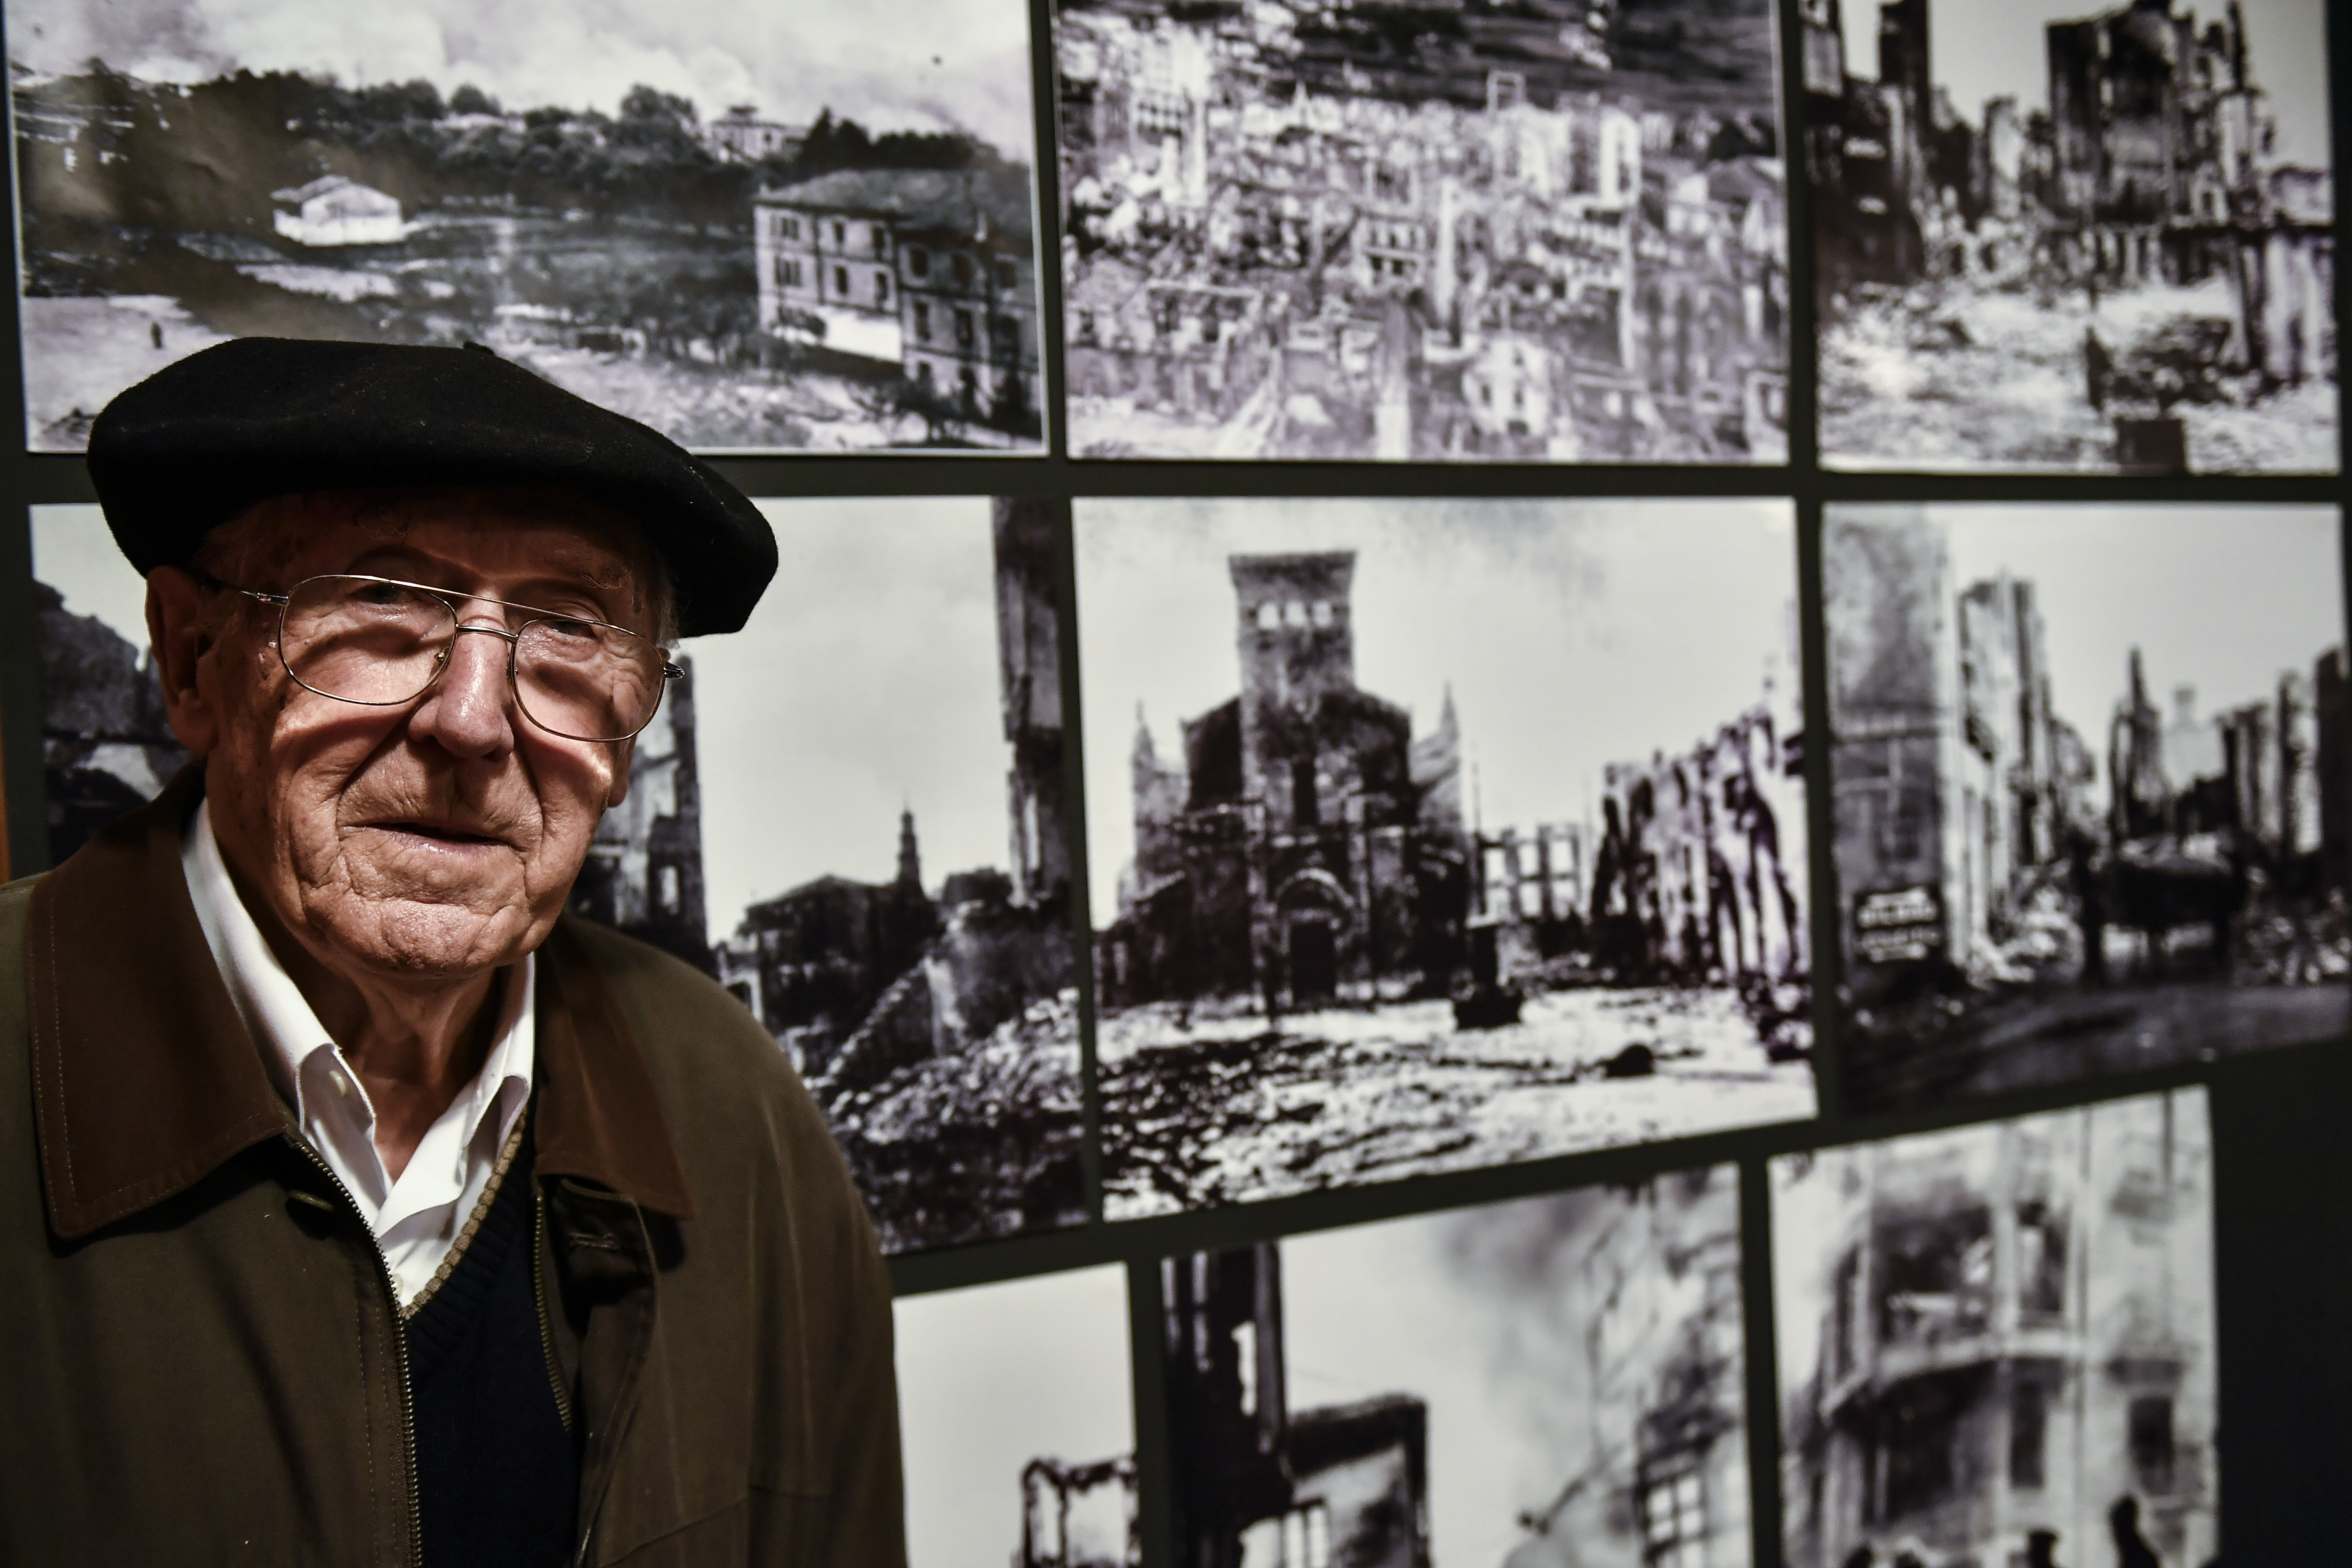 Luis Iriondo, 94 years old, a survivor of Guernica Civil War attack, poses beside old photographs of the small village destroyed, in Guernica, northern Spain, Wednesday, April 26, 2017. On this day in 1937, German and Italian warplanes raided the Basque town of Guernica during the Spanish Civil War; estimates of the number of people killed vary from the hundreds to the thousands. The carnage has ever since stood as a symbol of man's cruelty to his fellow man, immortalized in Pablo Picasso's immense and powerful painting, one of the most iconic works of art of the 20th century. (AP Photo/Alvaro Barrientos)